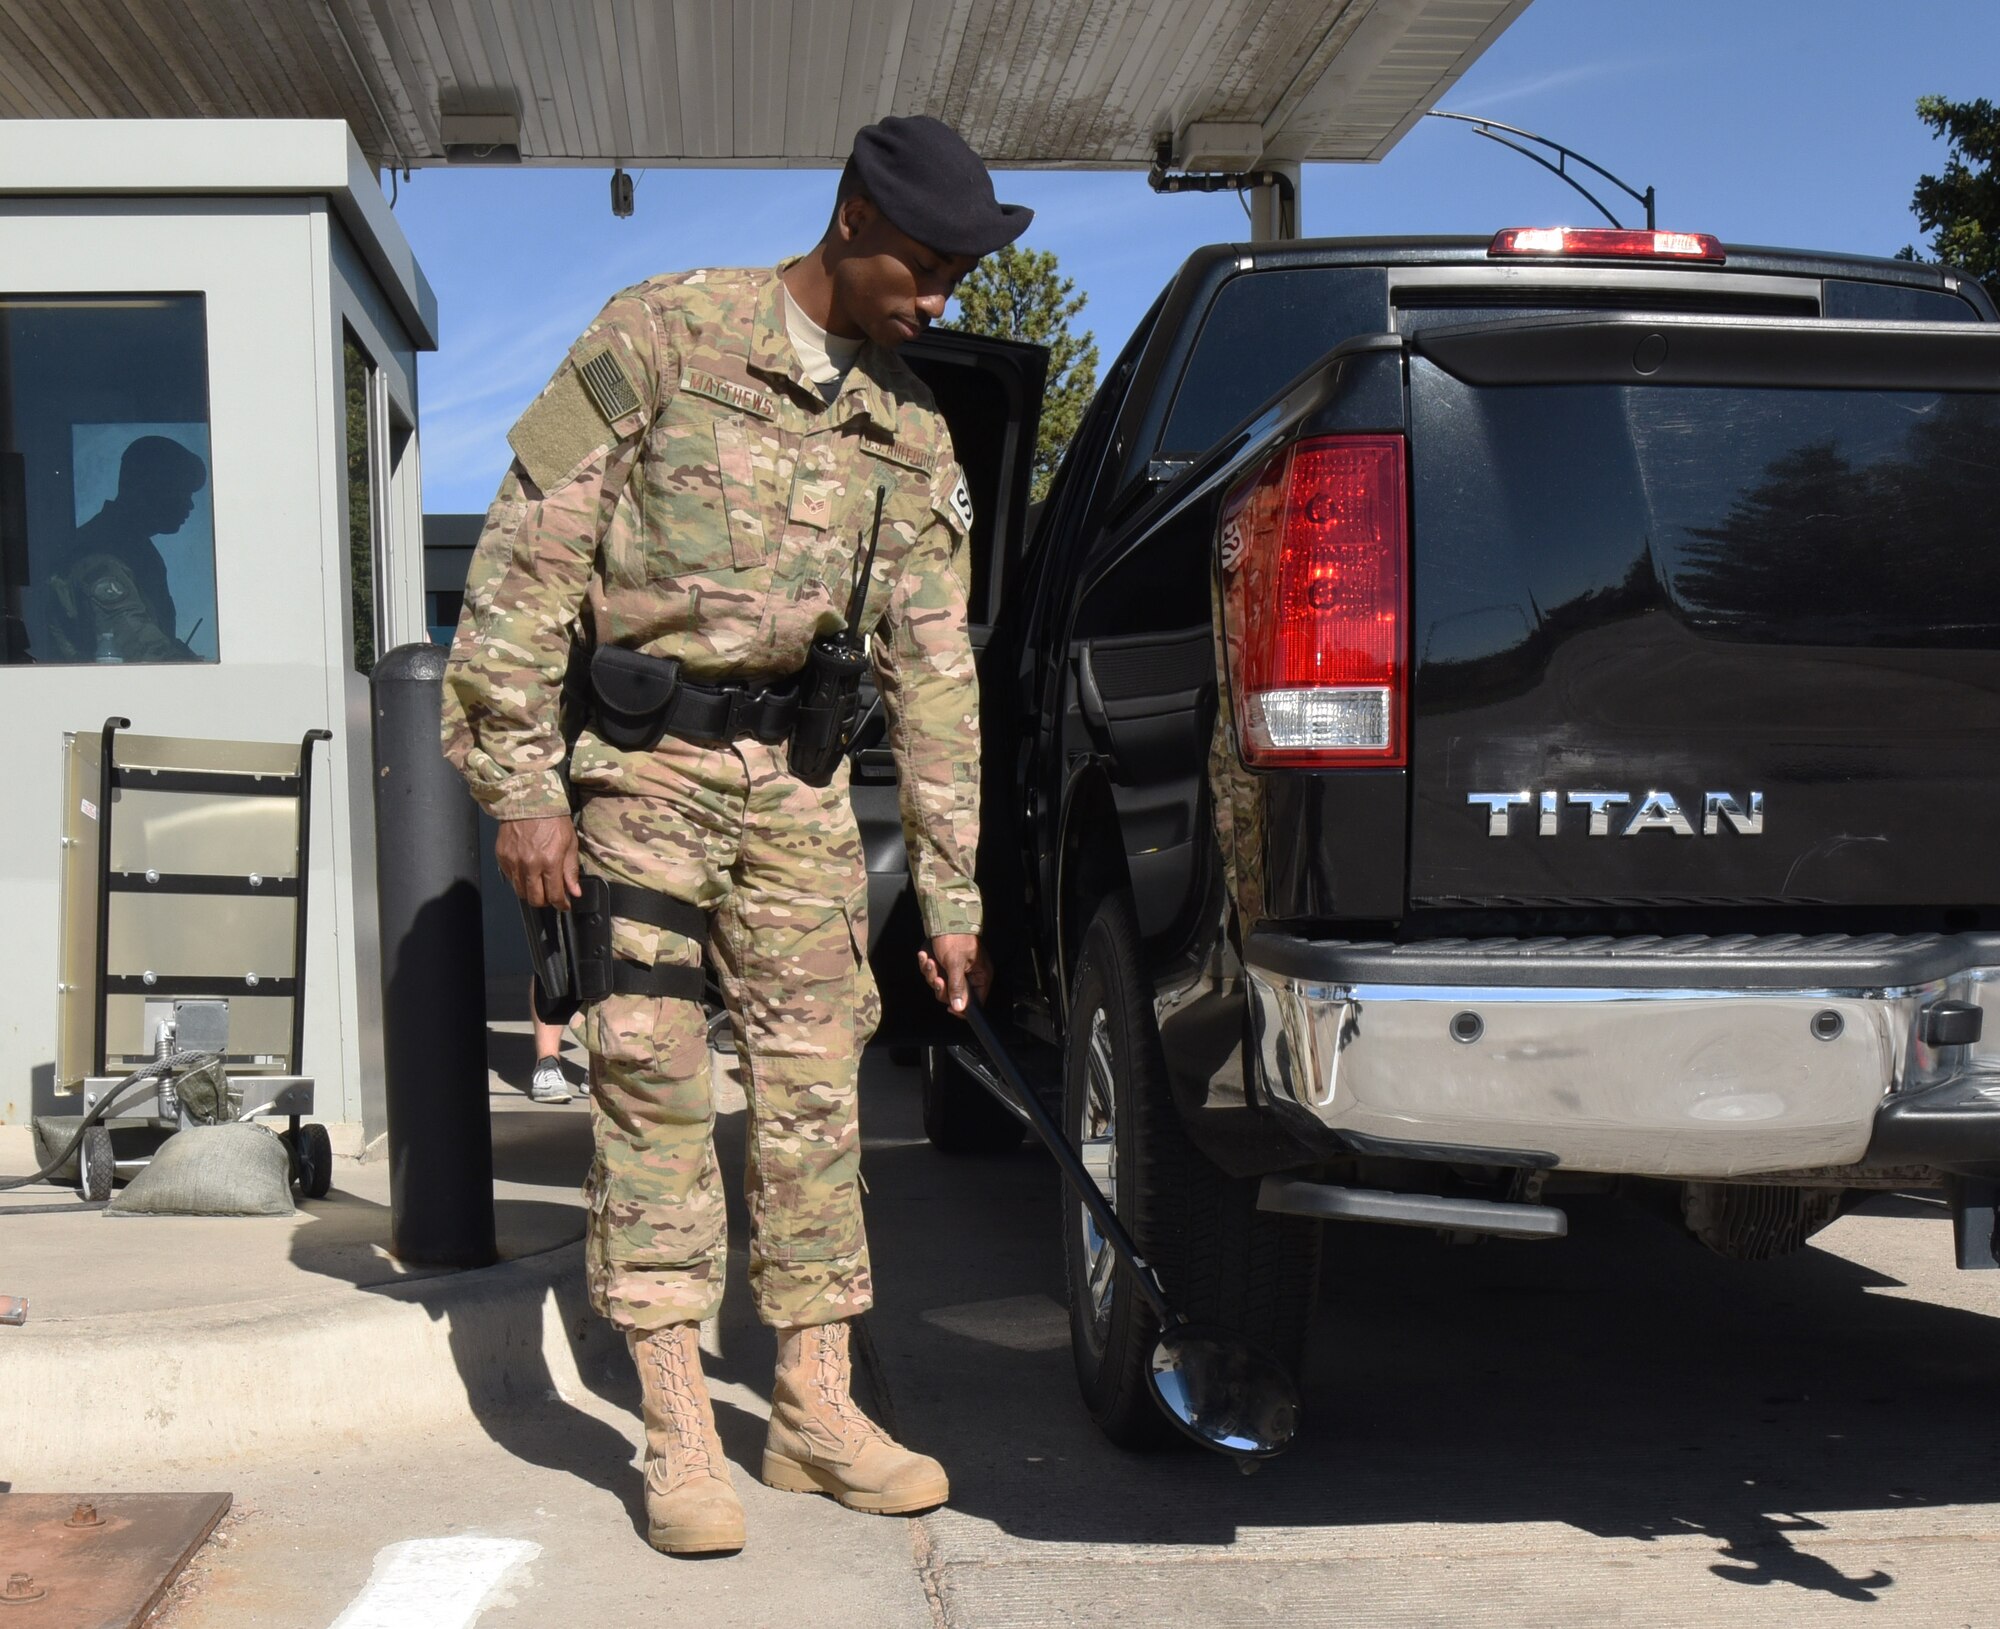 Senior Airman Markus Matthews, 90th Security Forces Squadron entry controller, conducts a random vehicle inspection at F.E. Warren Air Force Base, Wyo., July 14, 2017. The checks are performed as a random anti-terrorism measure to ensure the safety of the installation and its personnel. (U.S. Air Force photo by Airman 1st Class Breanna Carter)